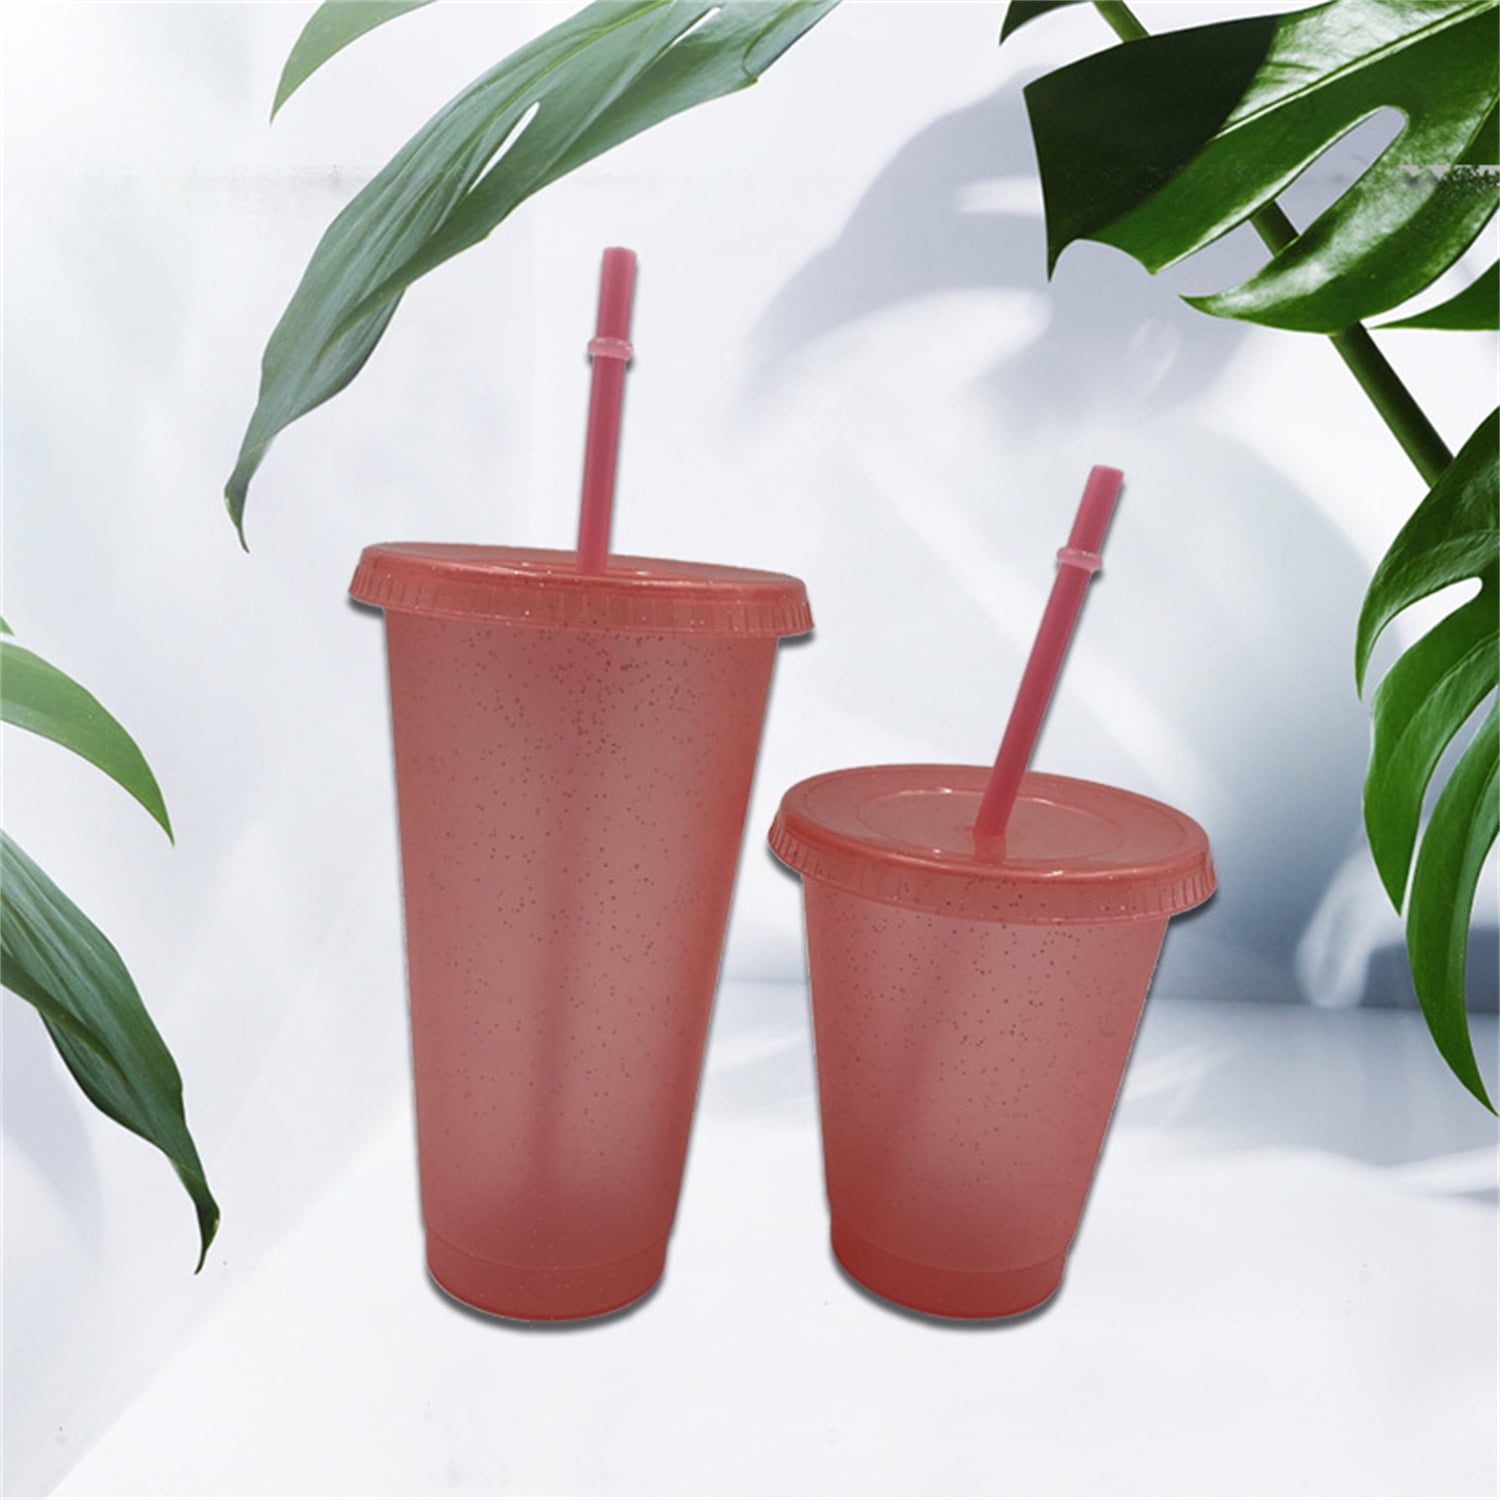 Plastic Kids' Cups with Lids/Straws by SOLO® SCCCC12CJ5145